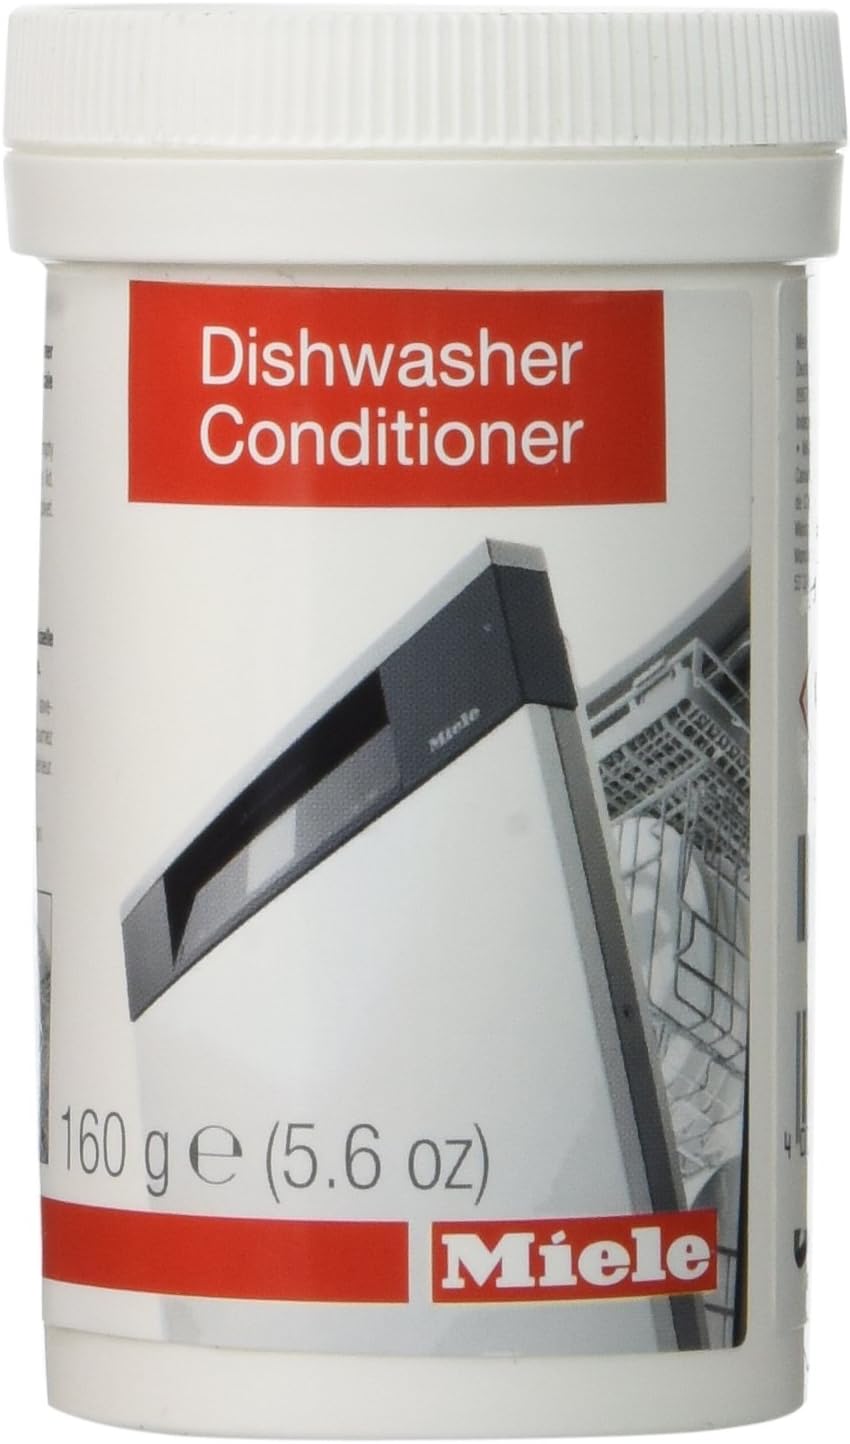 Miele DishClean NEW Dishwasher Conditioner in Powder form 160 g (5.6 oz) : Health & Household